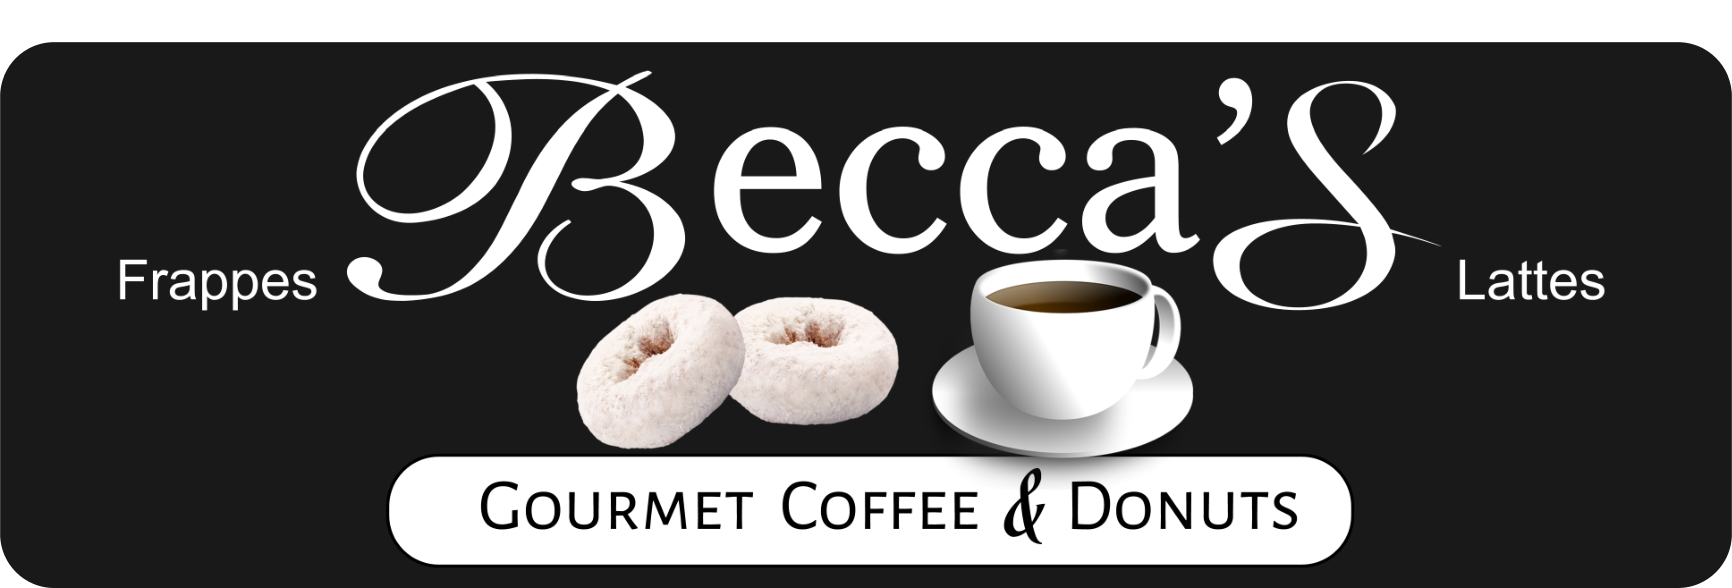 Becca's Gourmet Coffee & Donuts